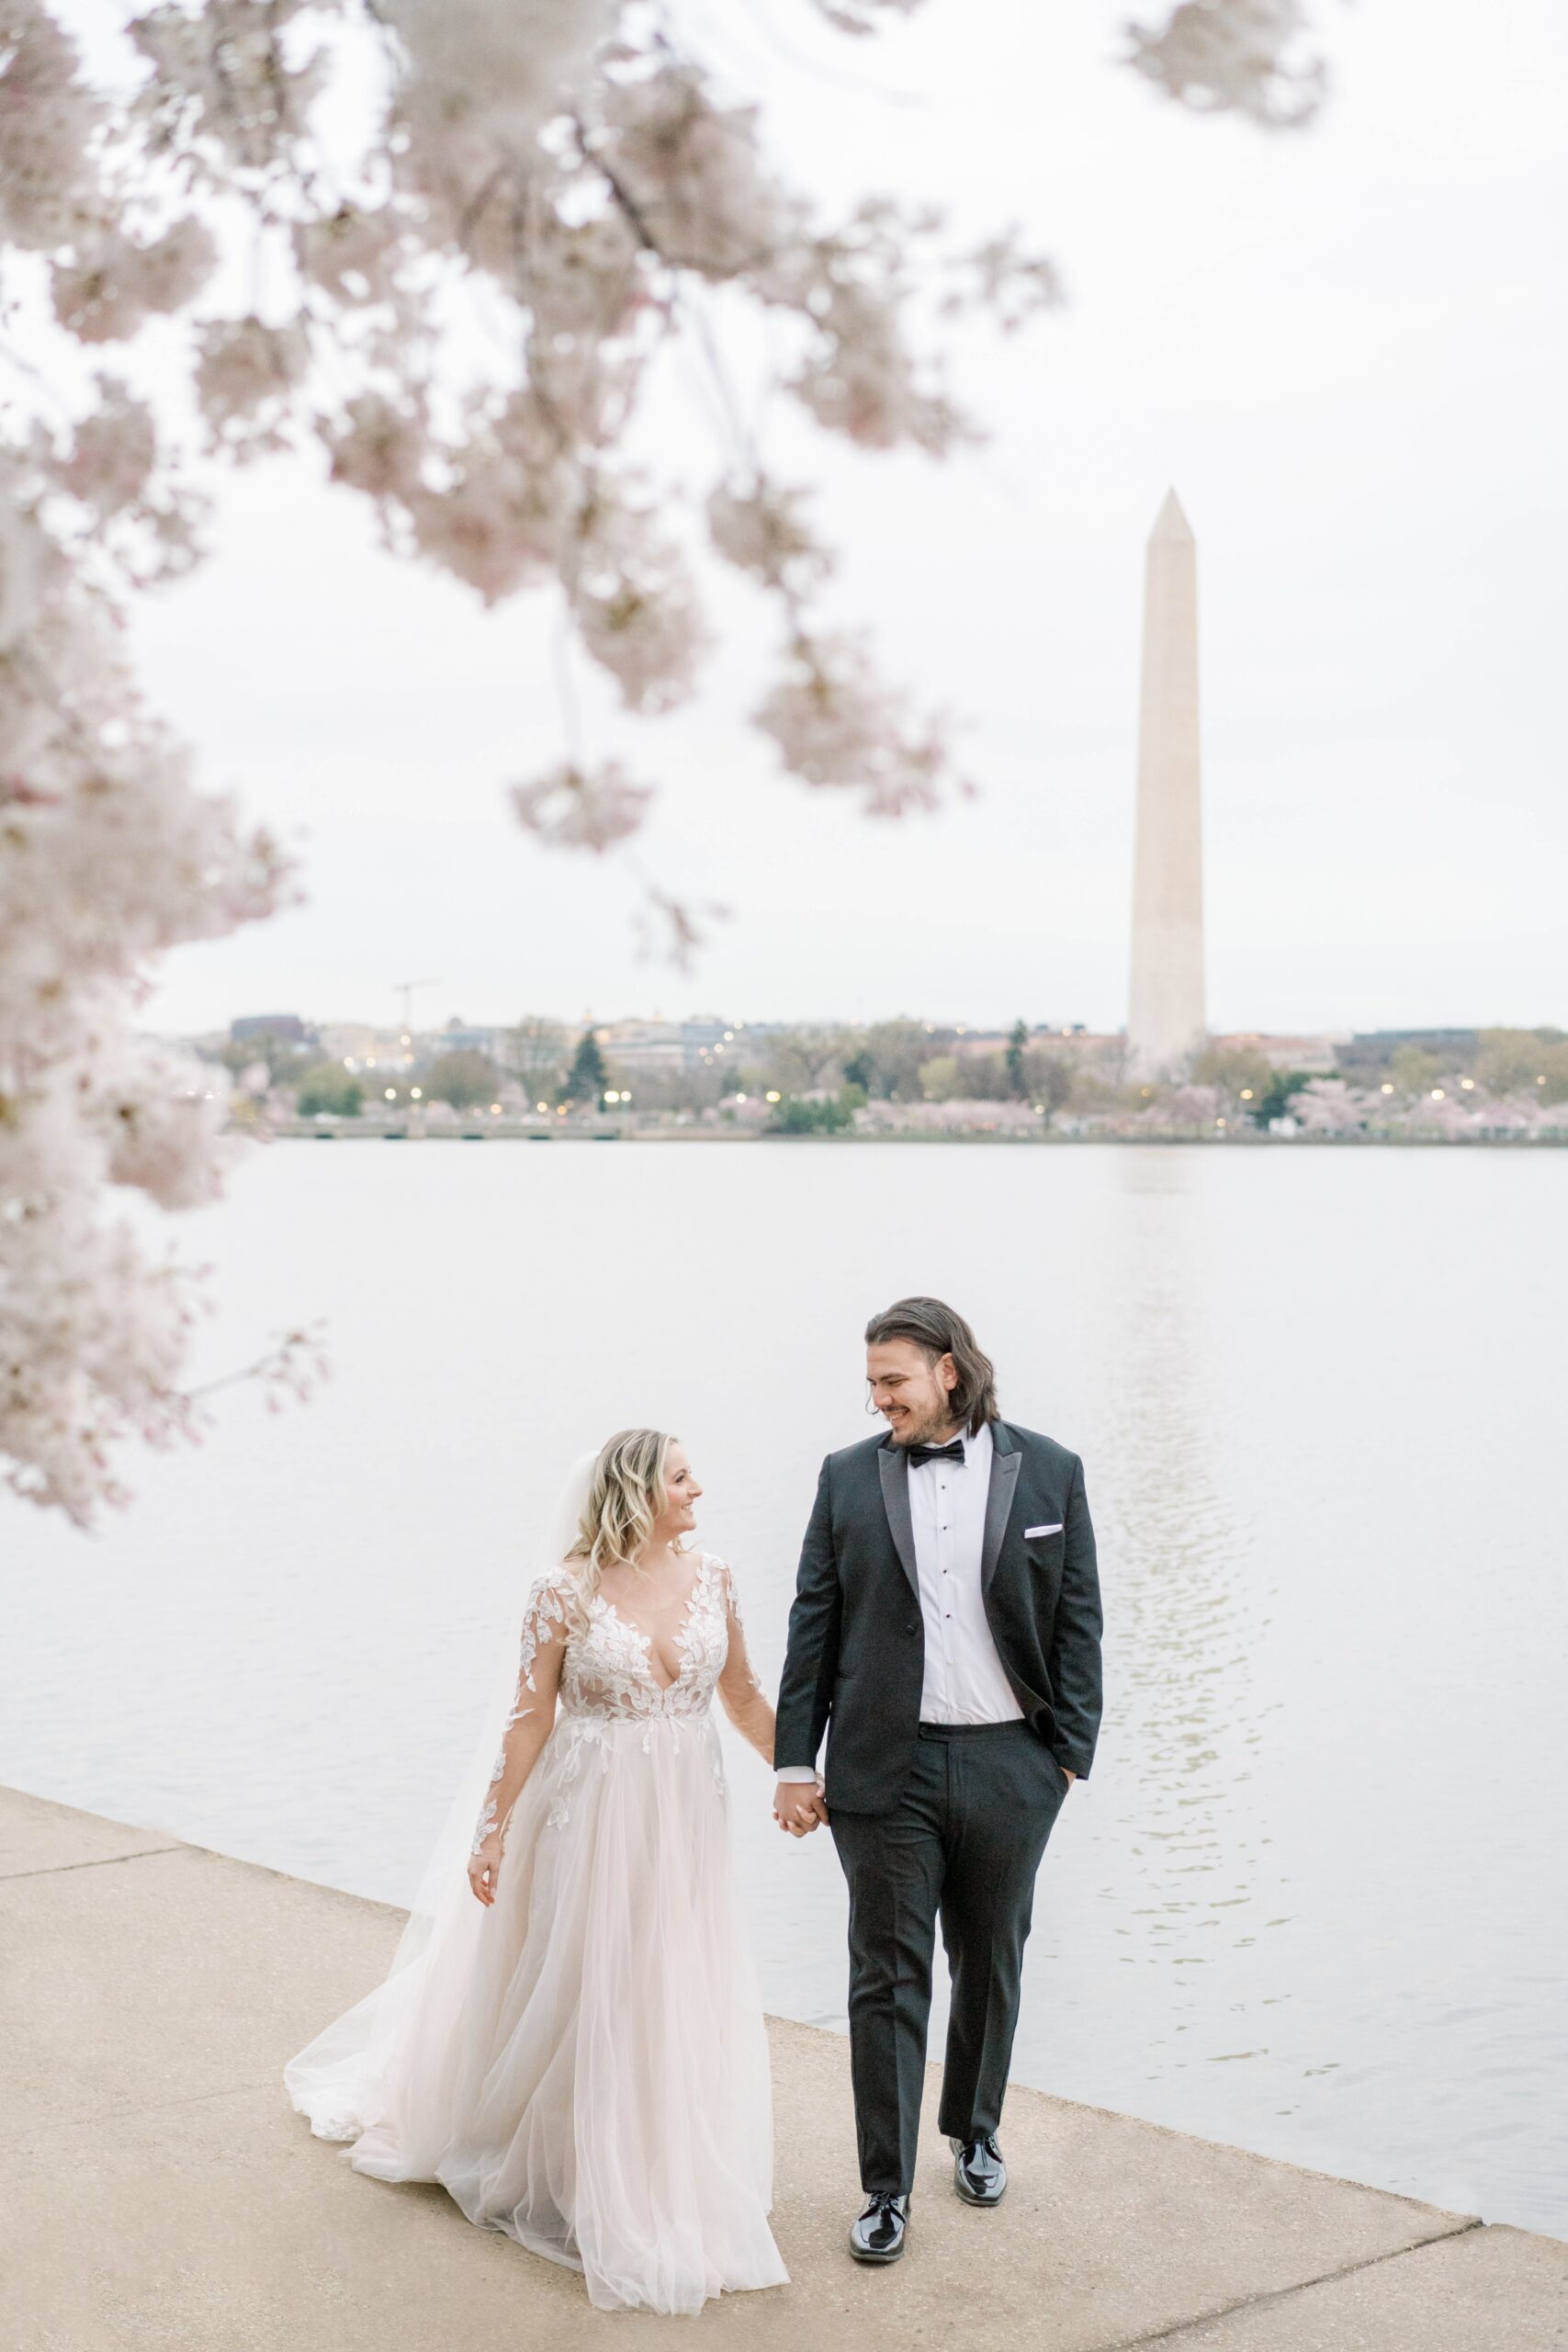 A romantic sunrise portrait session during the peak Cherry Blossom bloom at the Tidal Basin in Washington, DC.